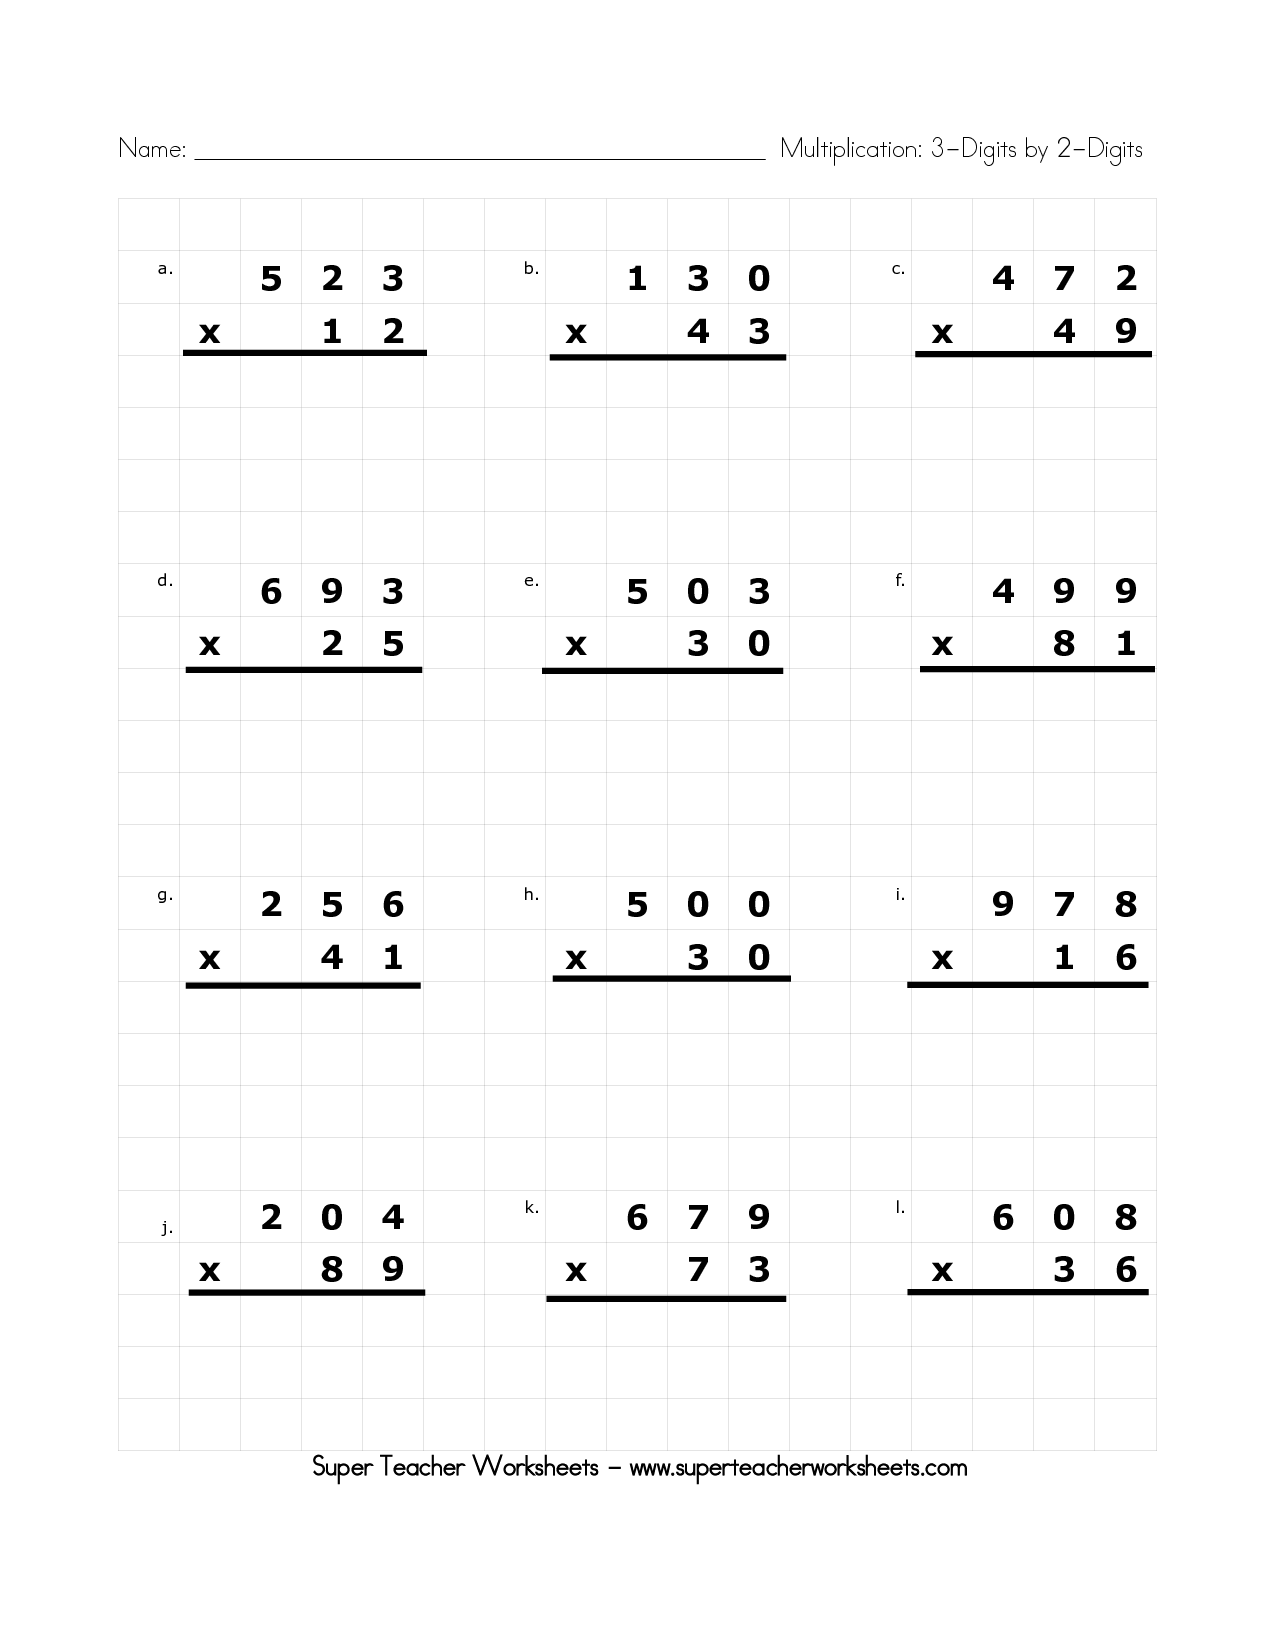 Two Digit Multiplication Worksheets With Answers